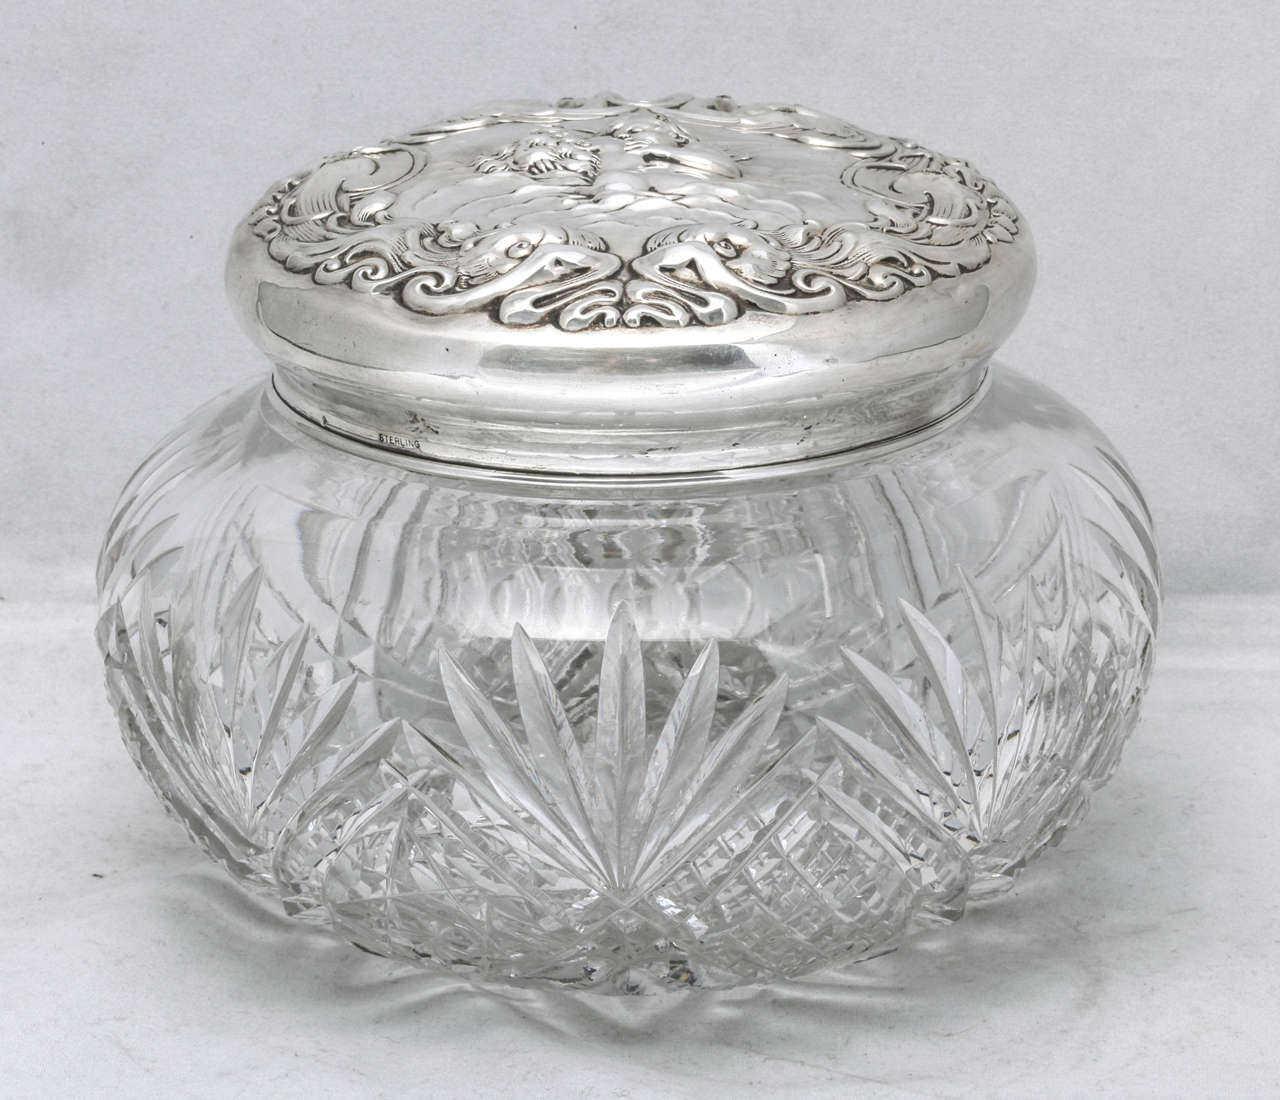 Rare, very large, Art Nouveau, sterling silver and cut crystal powder jar, American, circa 1895, most probably Unger Bros. (maker's mark rubbed). Measures: 5 1/4